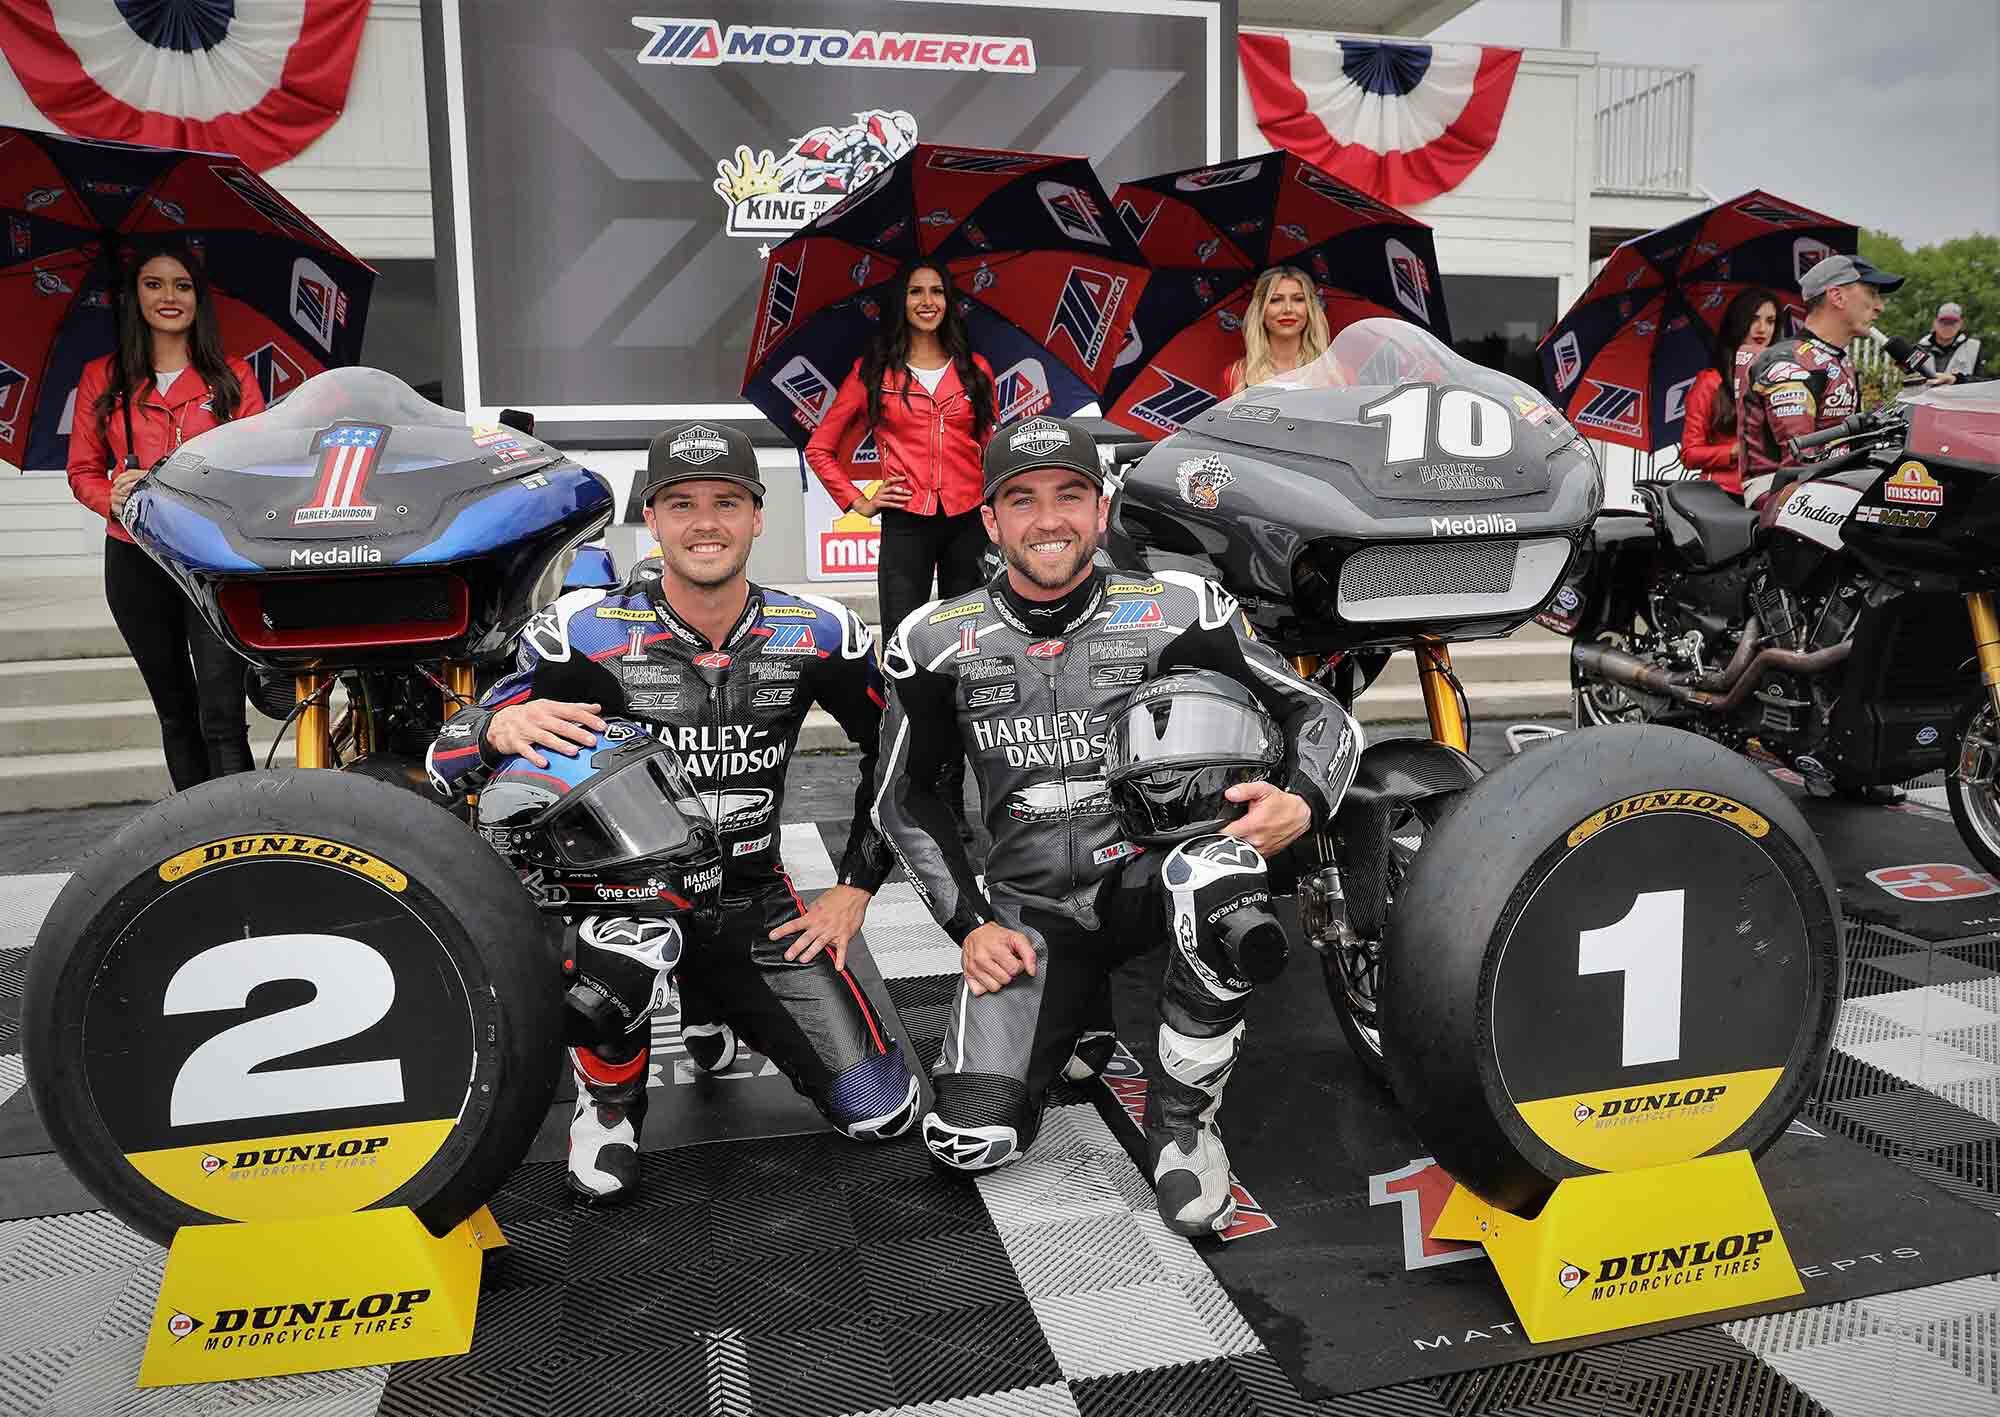 The Wyman brothers take a bow at the podium in Road America.